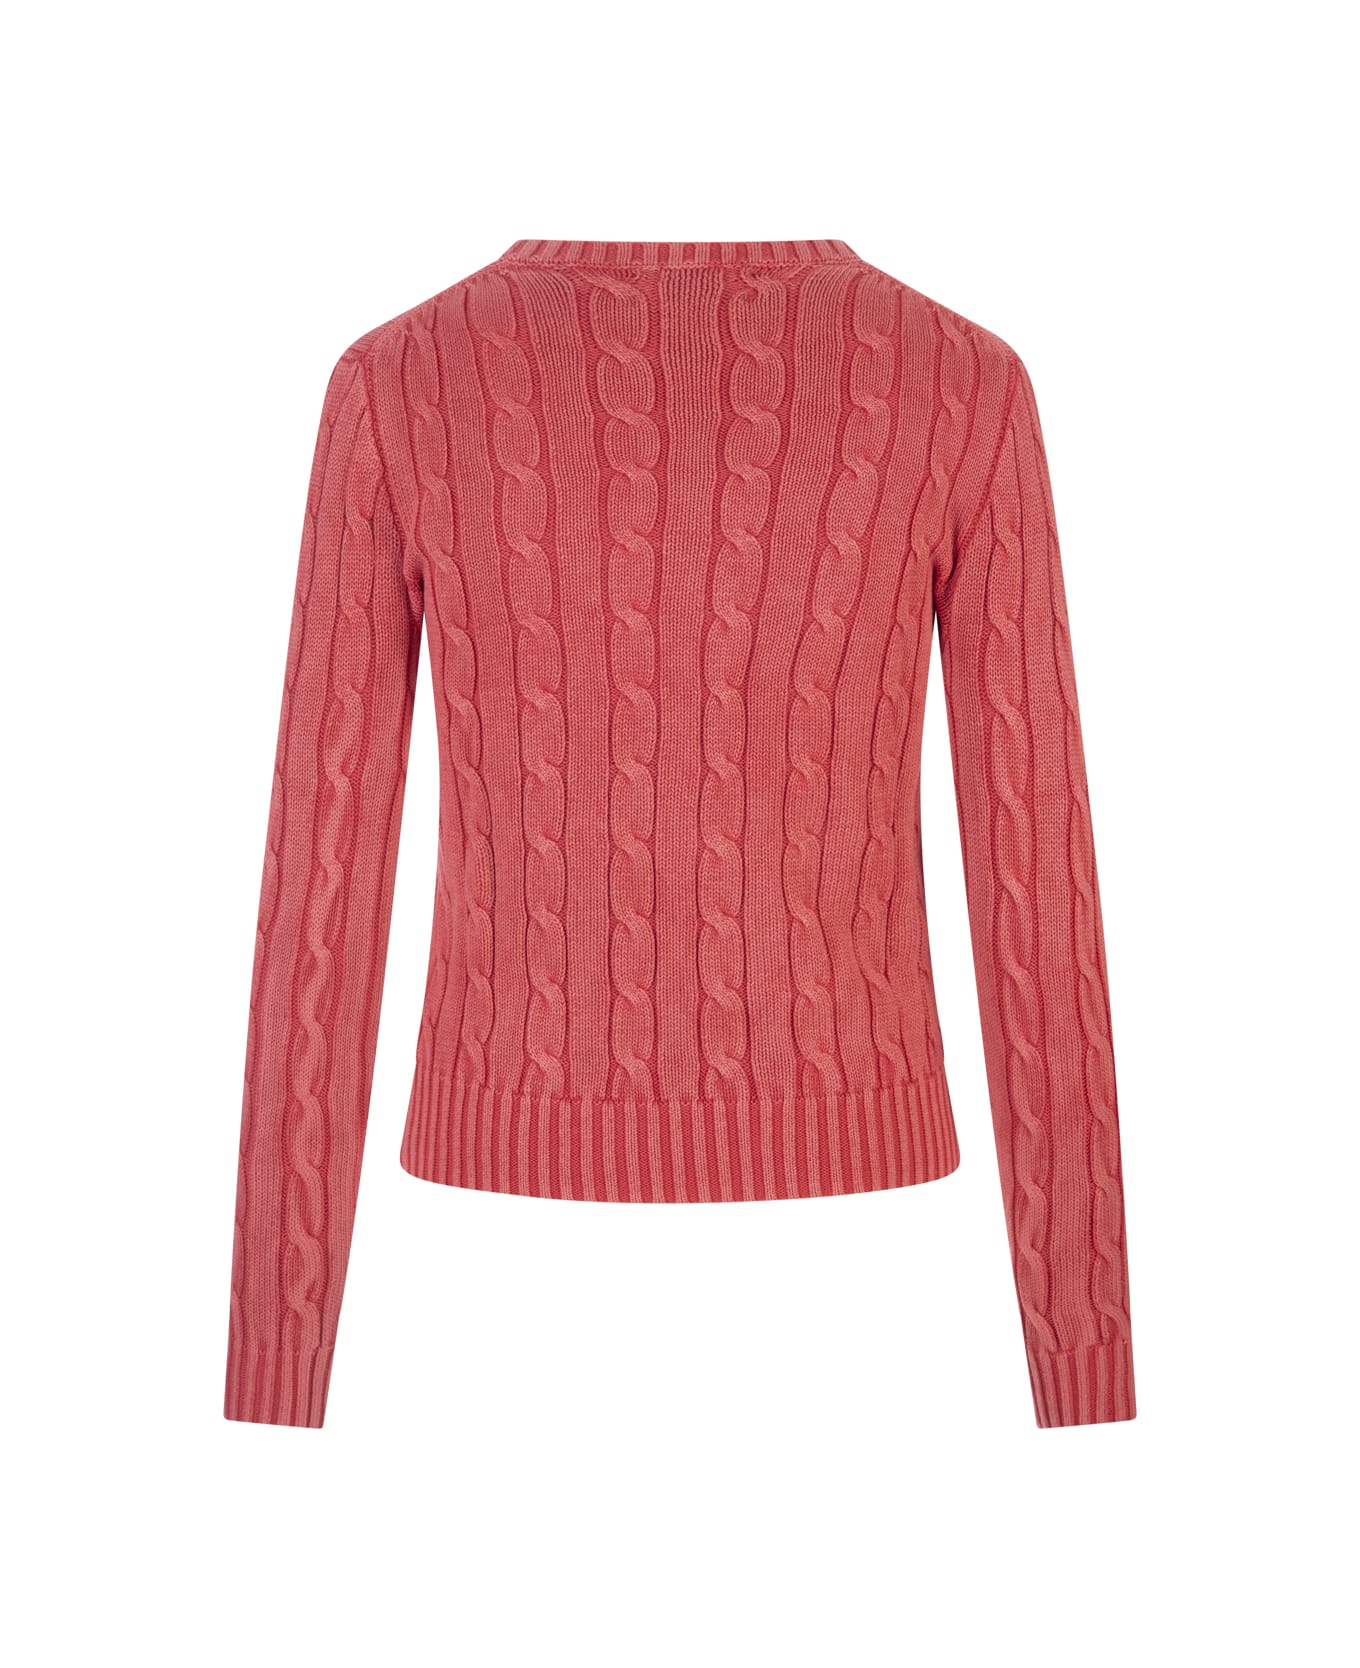 Ralph Lauren Coral Cable Cotton Sweater - Red